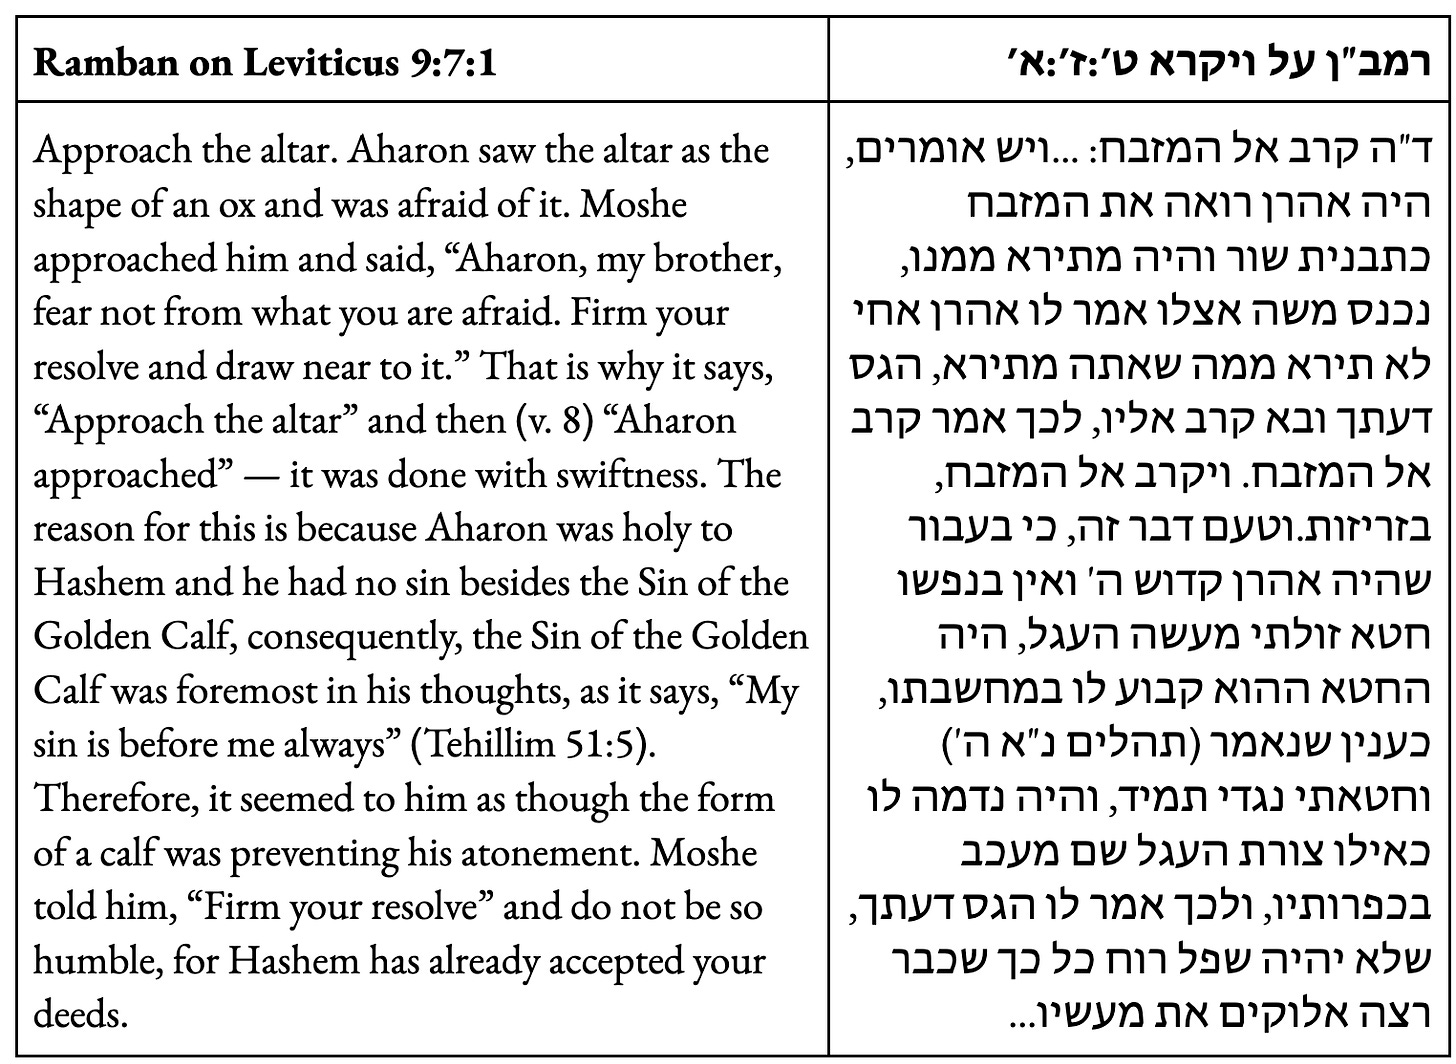 Approach the altar. Aharon saw the altar as the shape of an ox and was afraid of it. Moshe approached him and said, “Aharon, my brother, fear not from what you are afraid. Firm your resolve and draw near to it.” That is why it says, “Approach the altar” and then (v. 8) “Aharon approached” — it was done with swiftness. The reason for this is because Aharon was holy to Hashem and he had no sin besides the Sin of the Golden Calf, consequently, the Sin of the Golden Calf was foremost in his thoughts, as it says, “My sin is before me always” (Tehillim 51:5). Therefore, it seemed to him as though the form of a calf was preventing his atonement. Moshe told him, “Firm your resolve” and do not be so humble, for Hashem has already accepted your deeds.